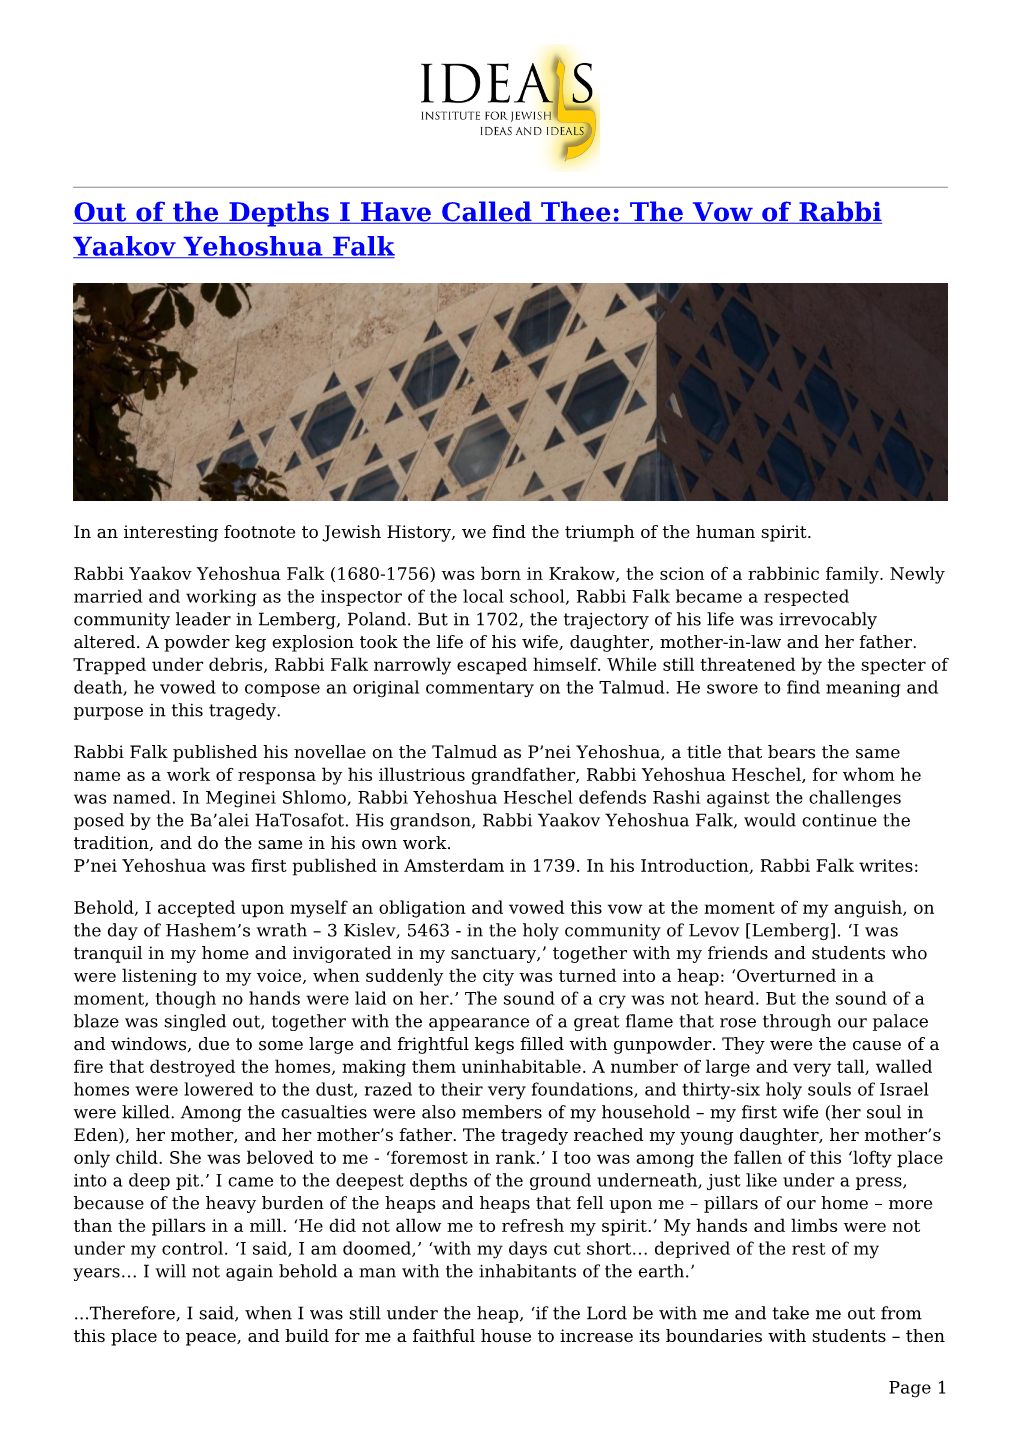 Out of the Depths I Have Called Thee: the Vow of Rabbi Yaakov Yehoshua Falk